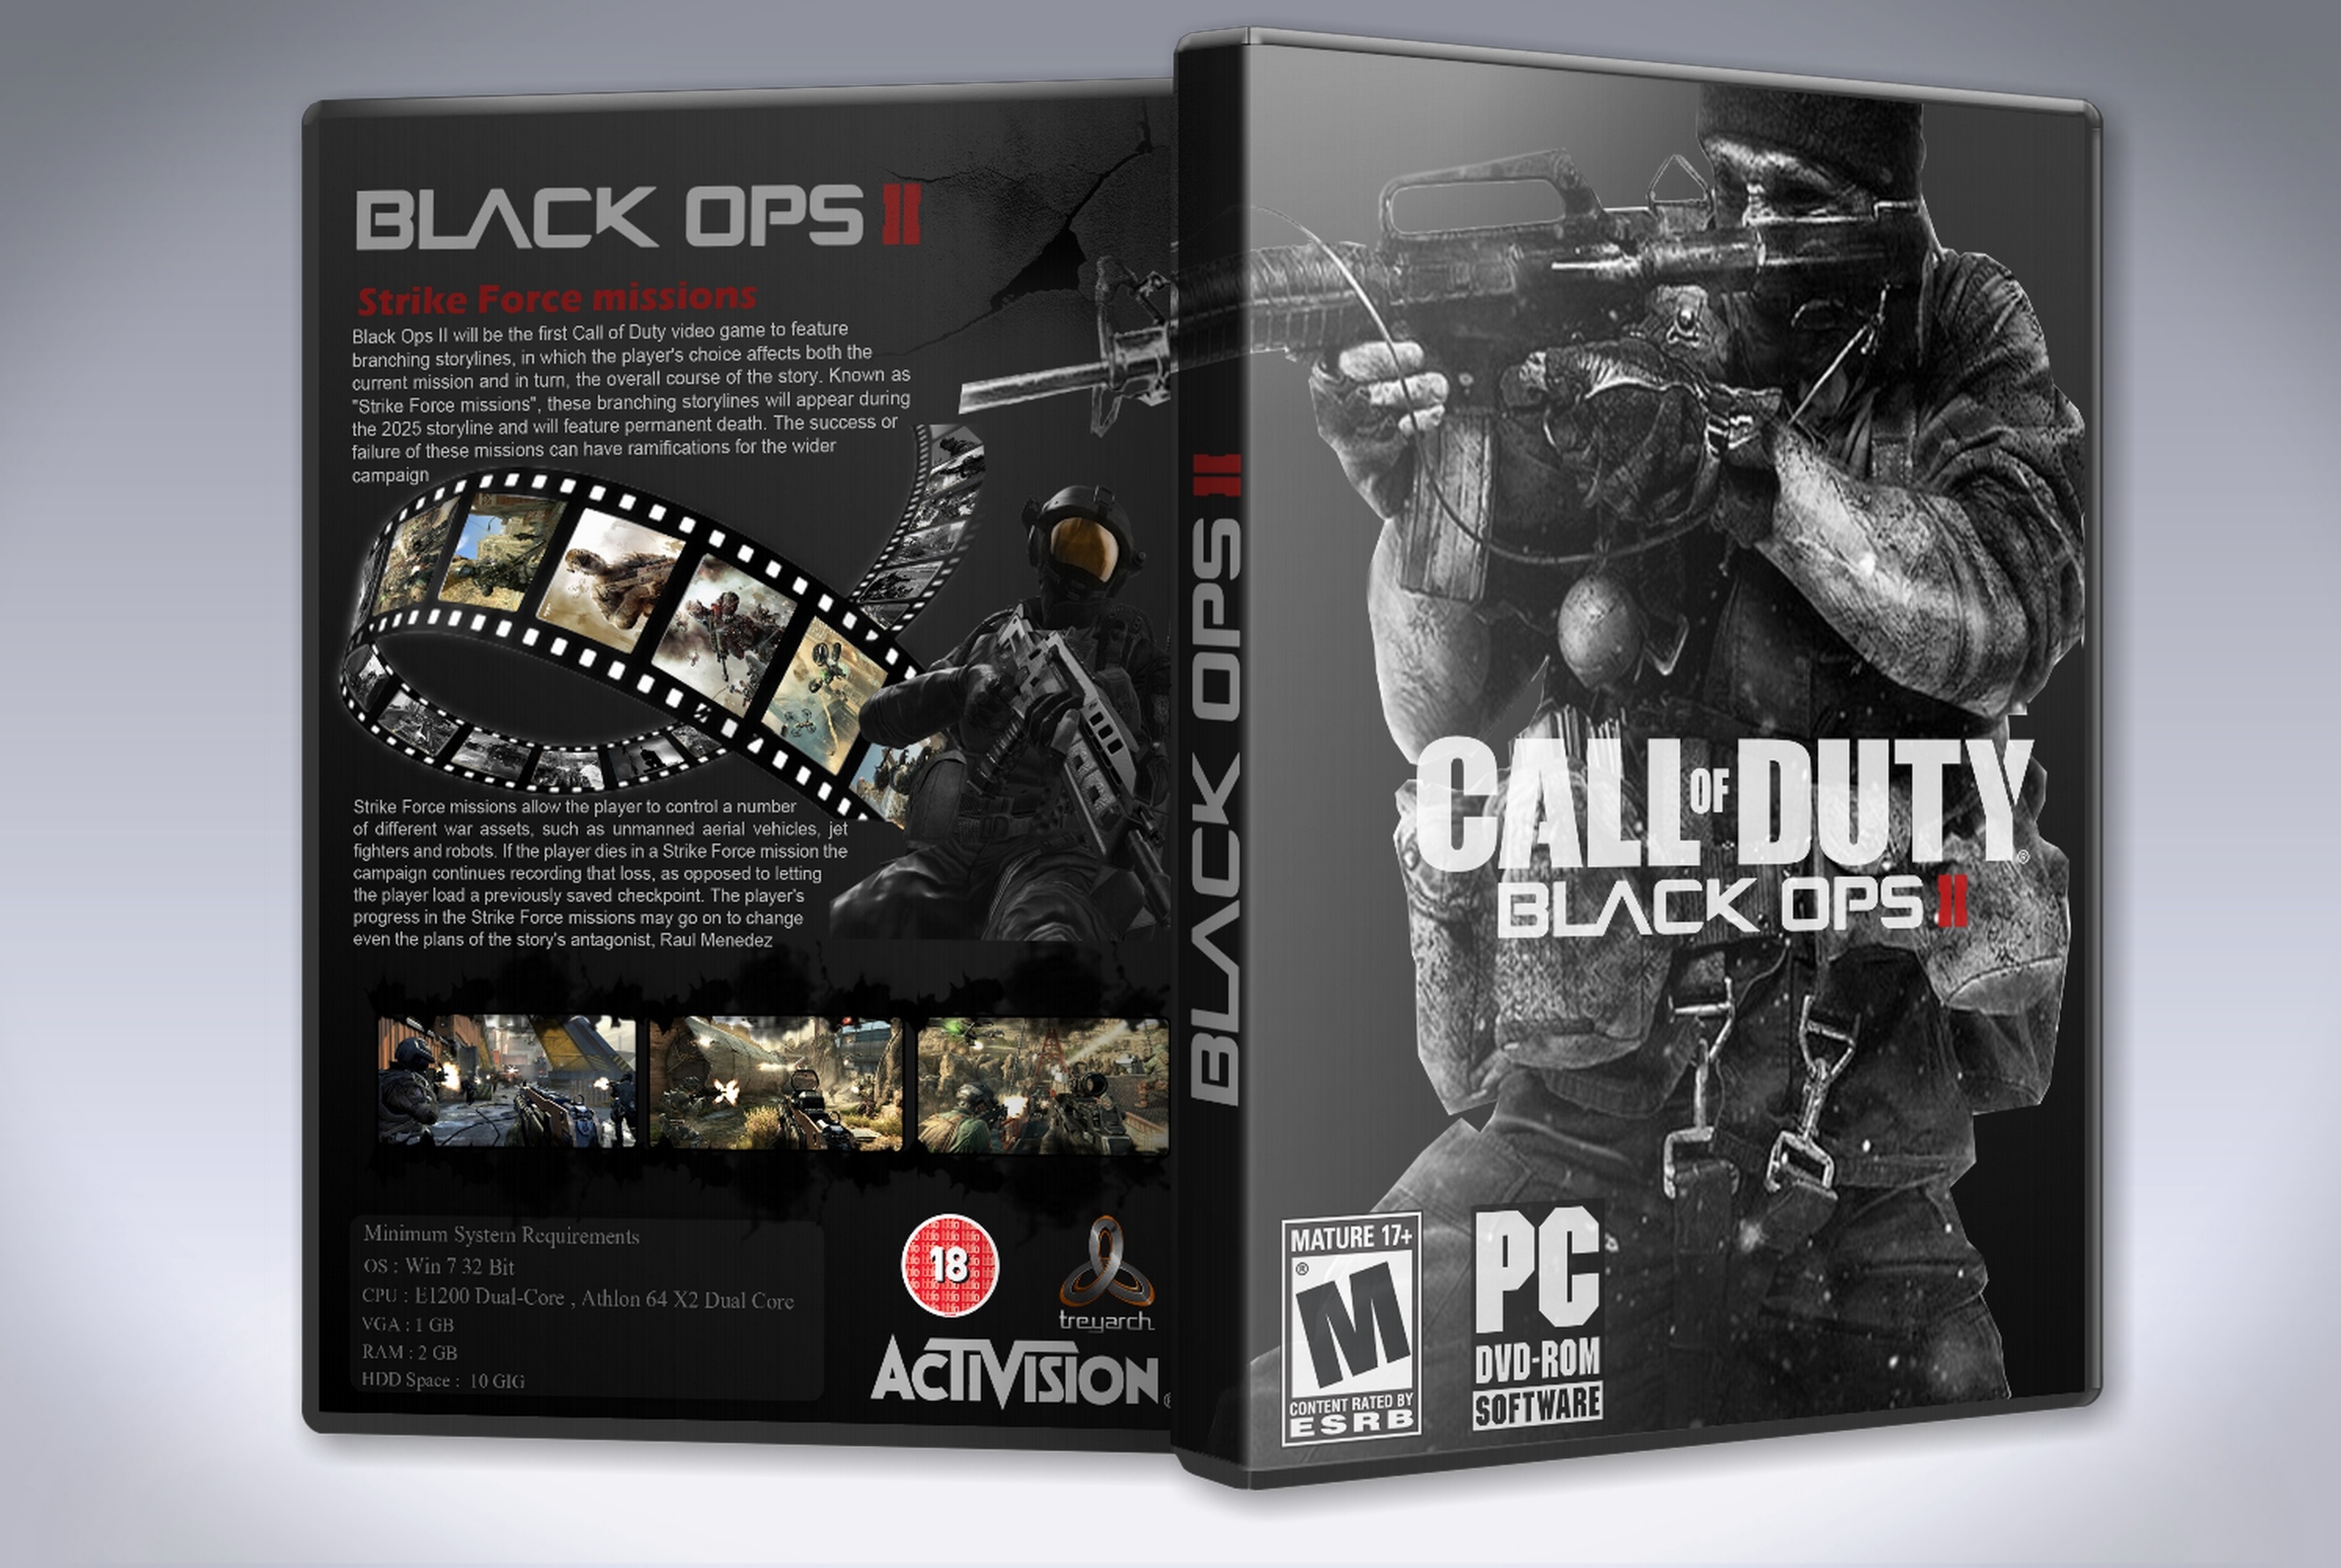 call of duty black ops 2 pc cracked